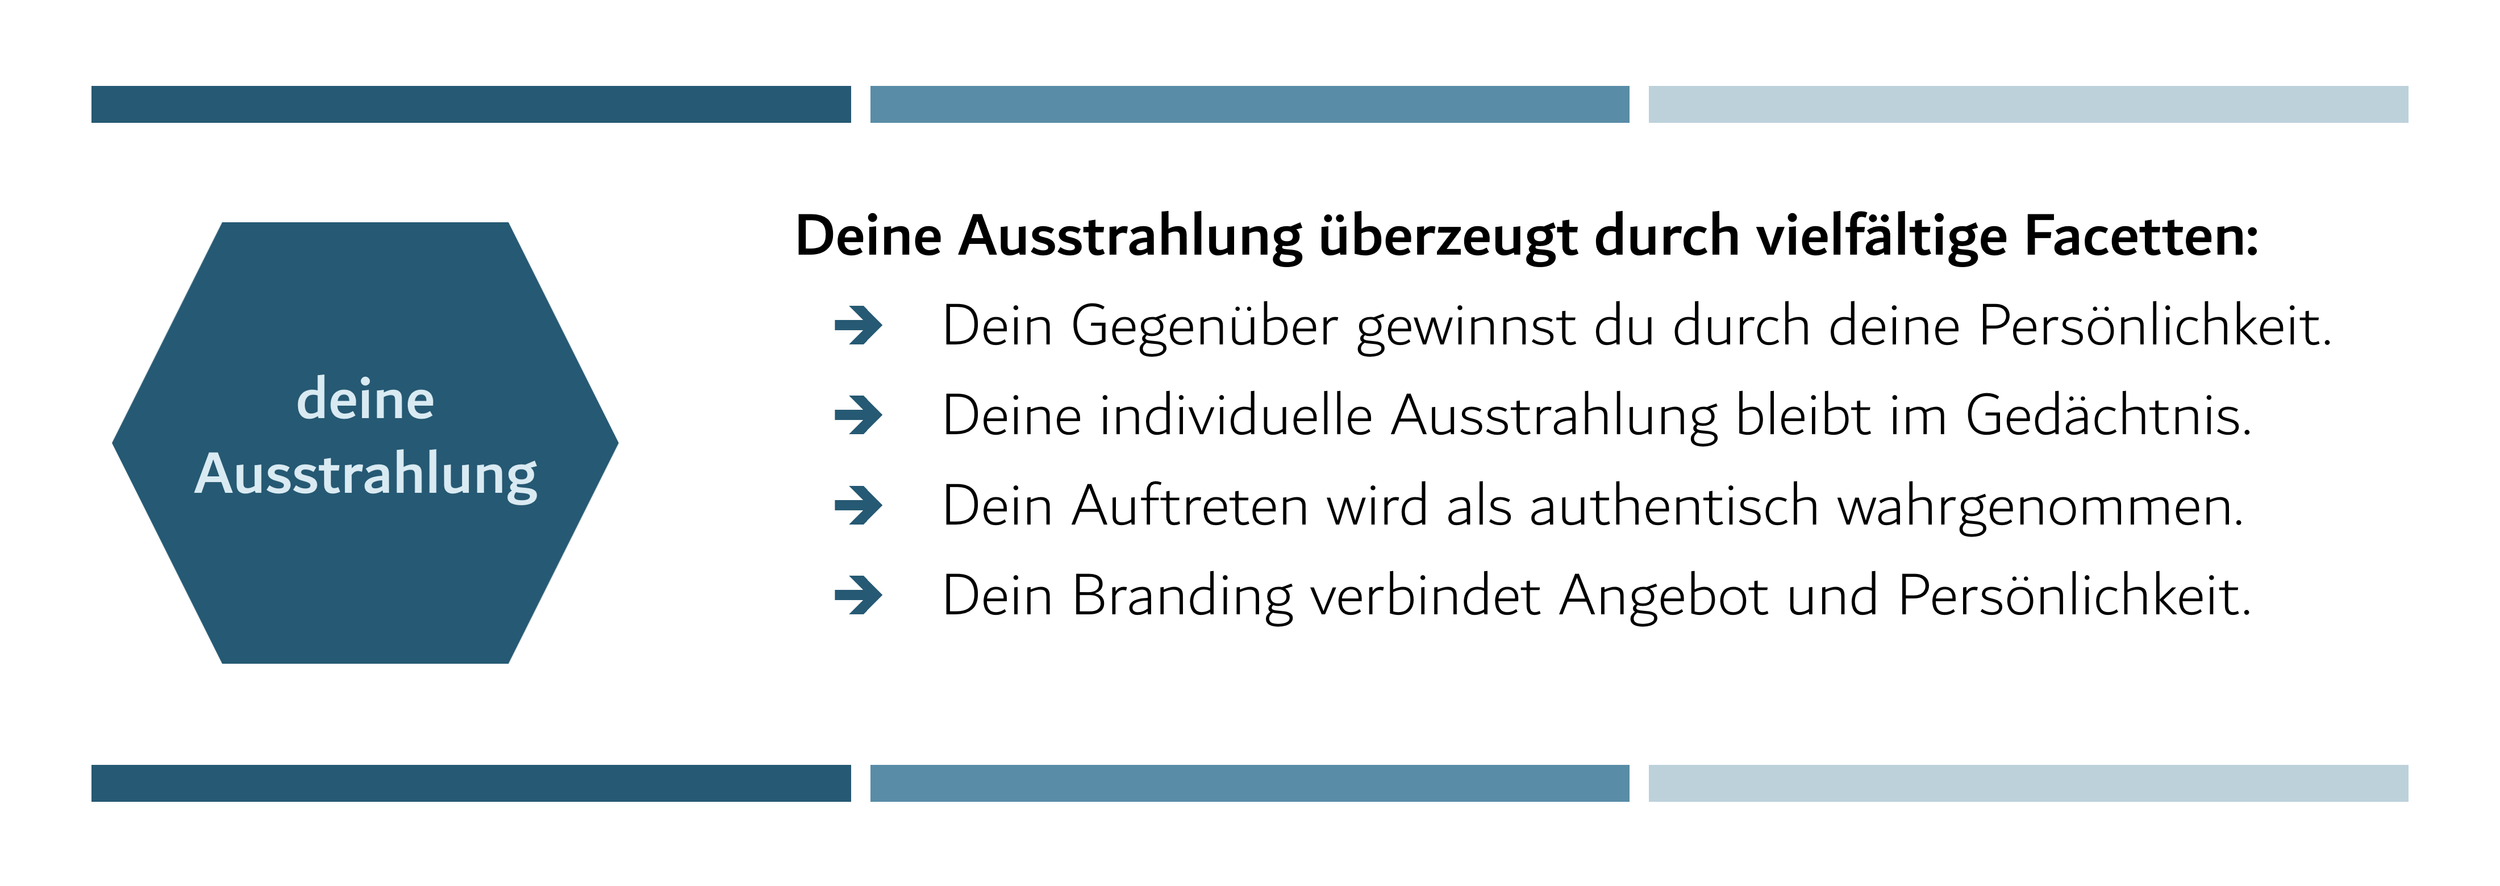 Slideshow - Ausstrahlung.png